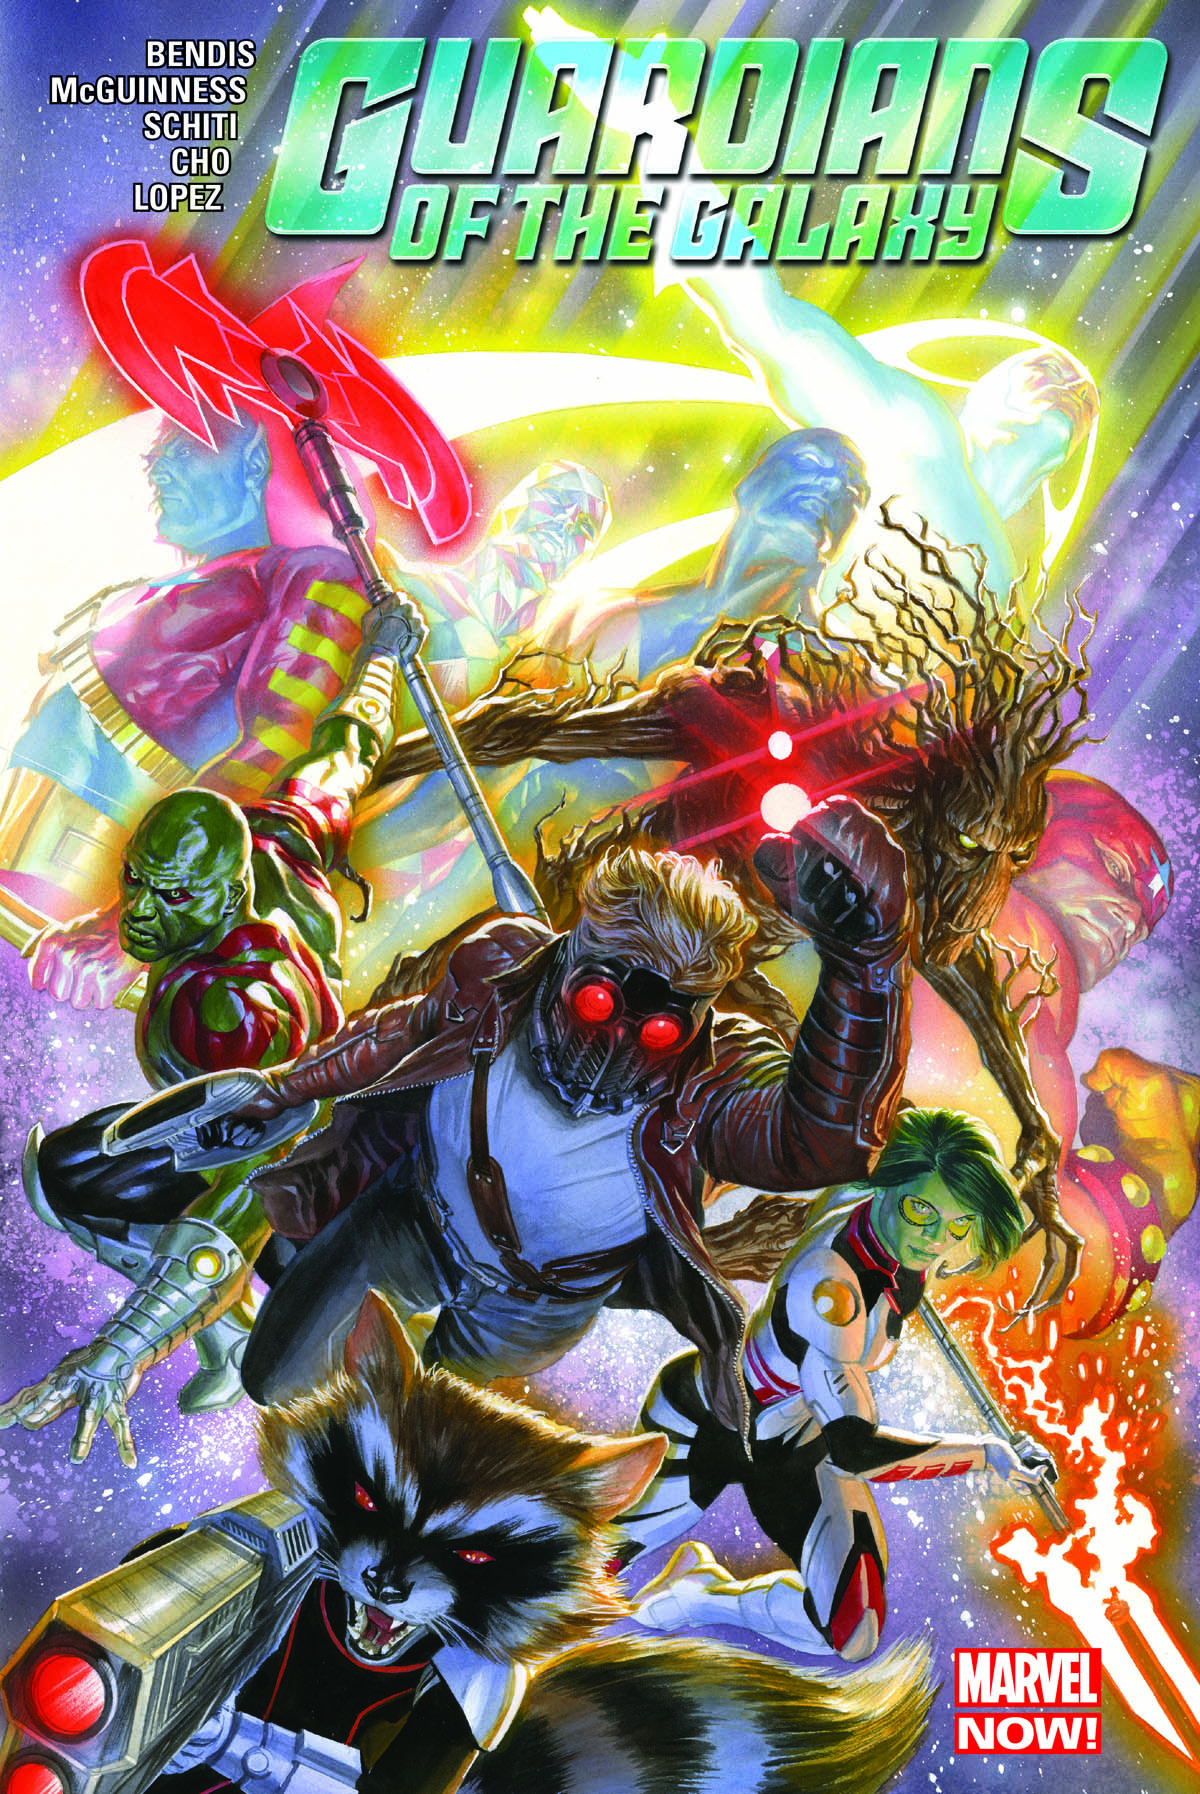 GUARDIANS OF THE GALAXY VOL. 3 HC (Trade Paperback)